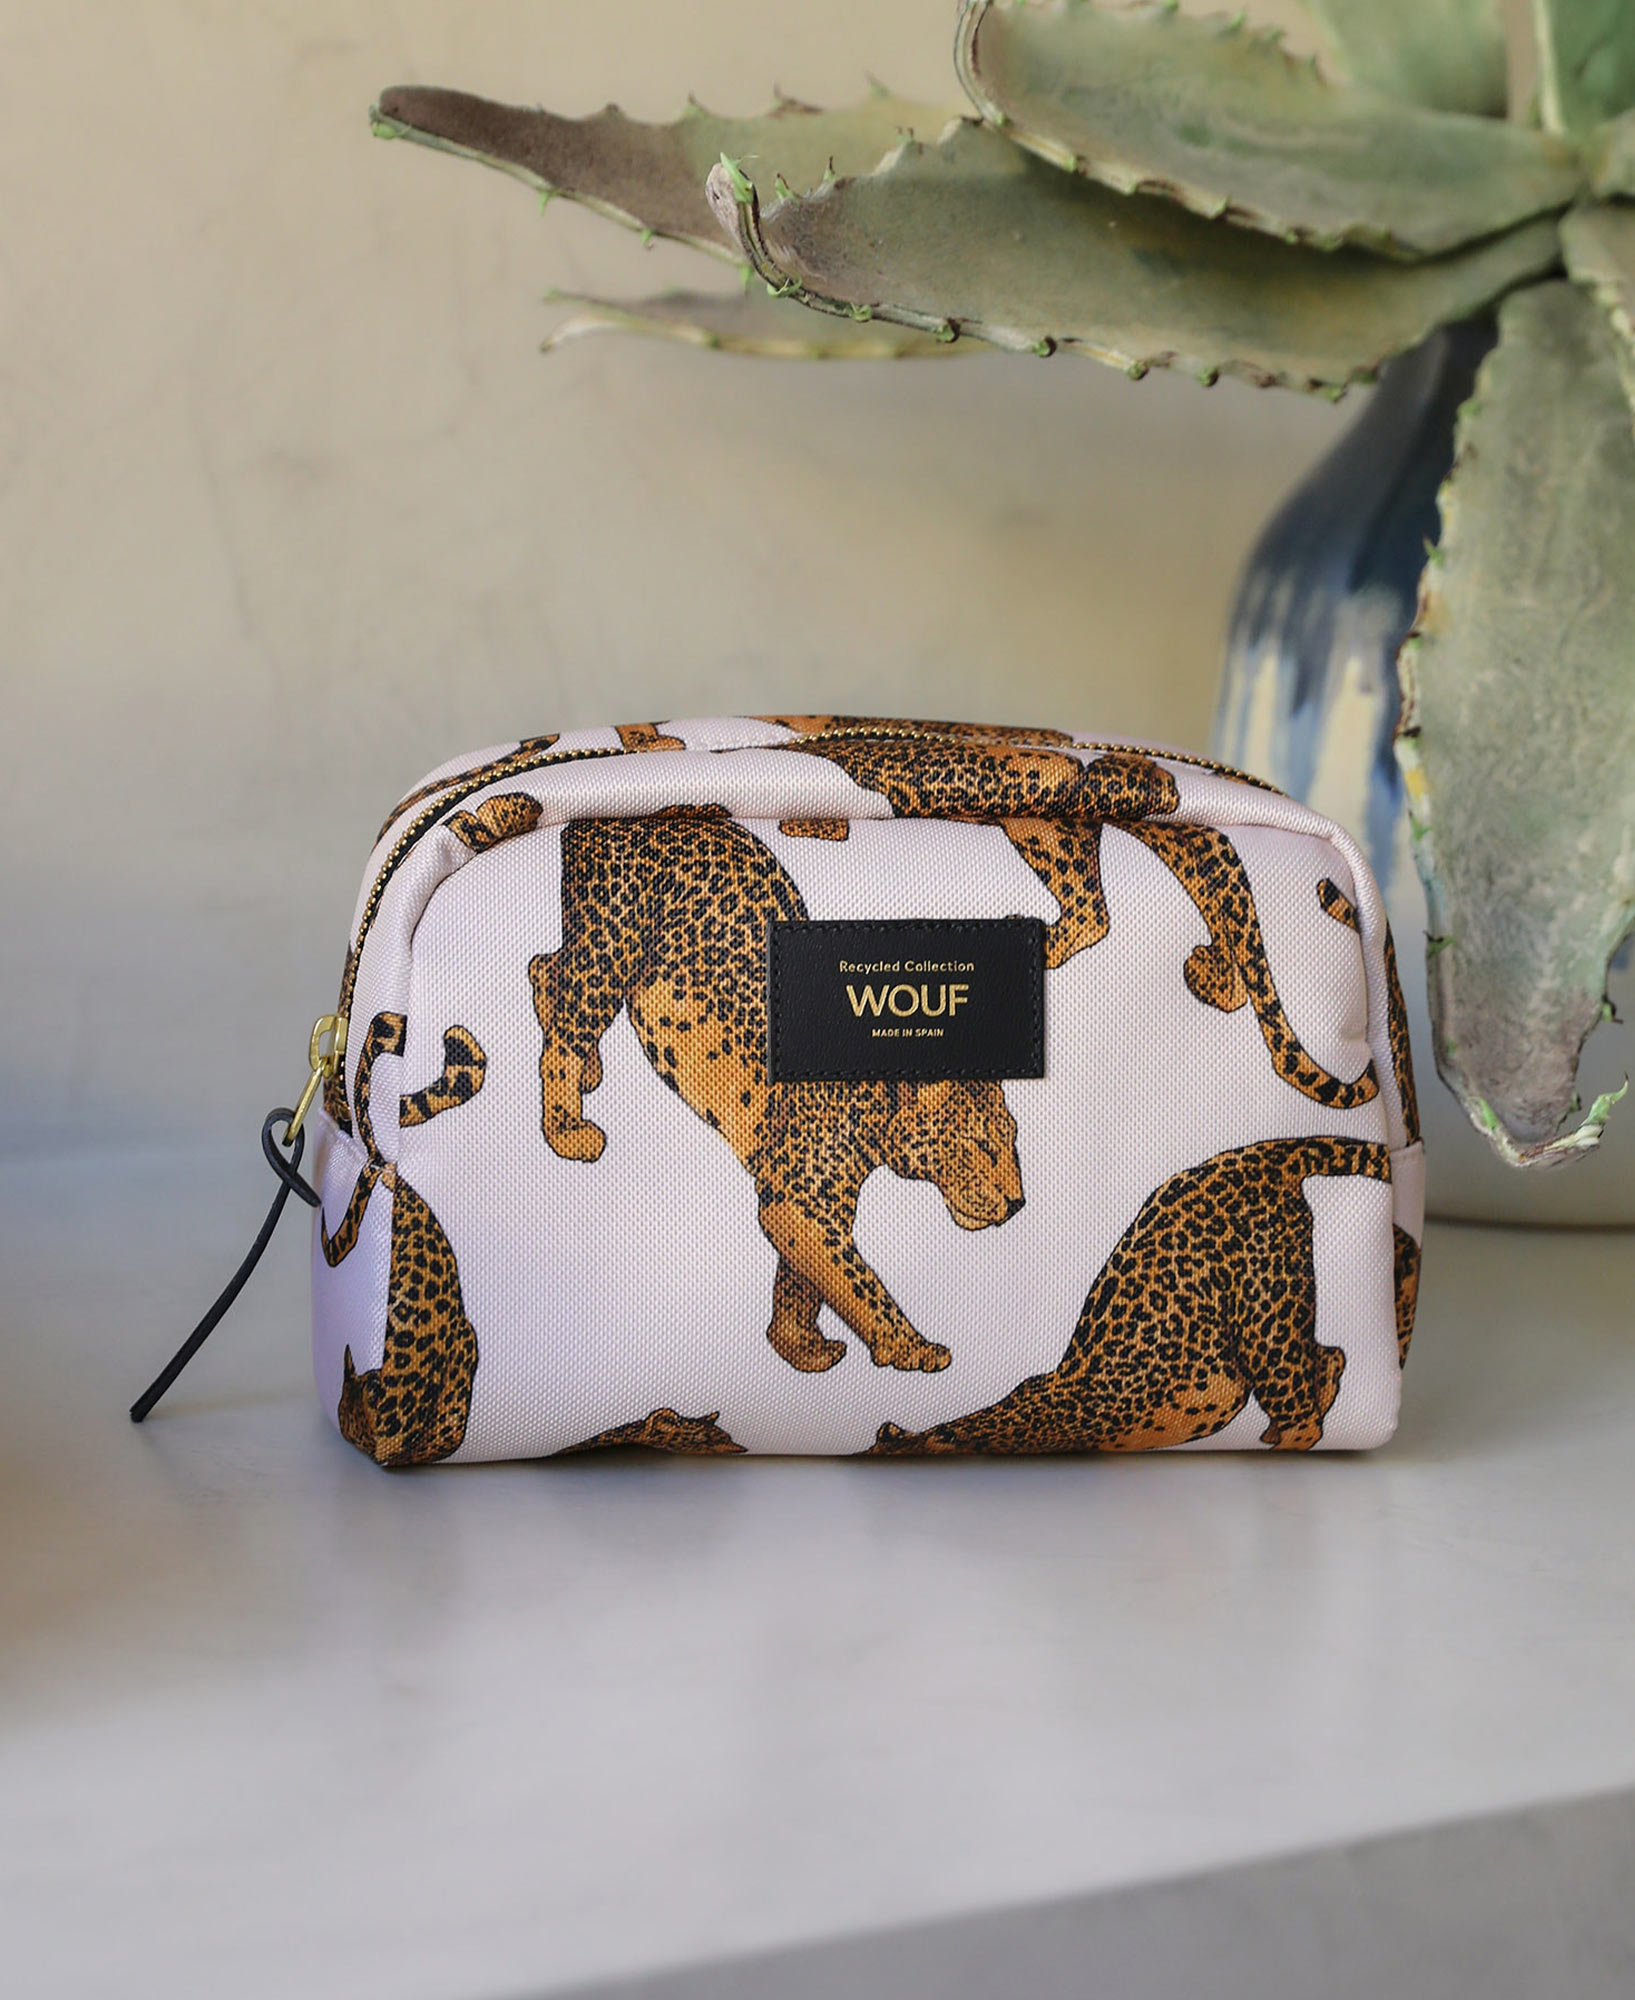 The Leopard Toiletry Bag